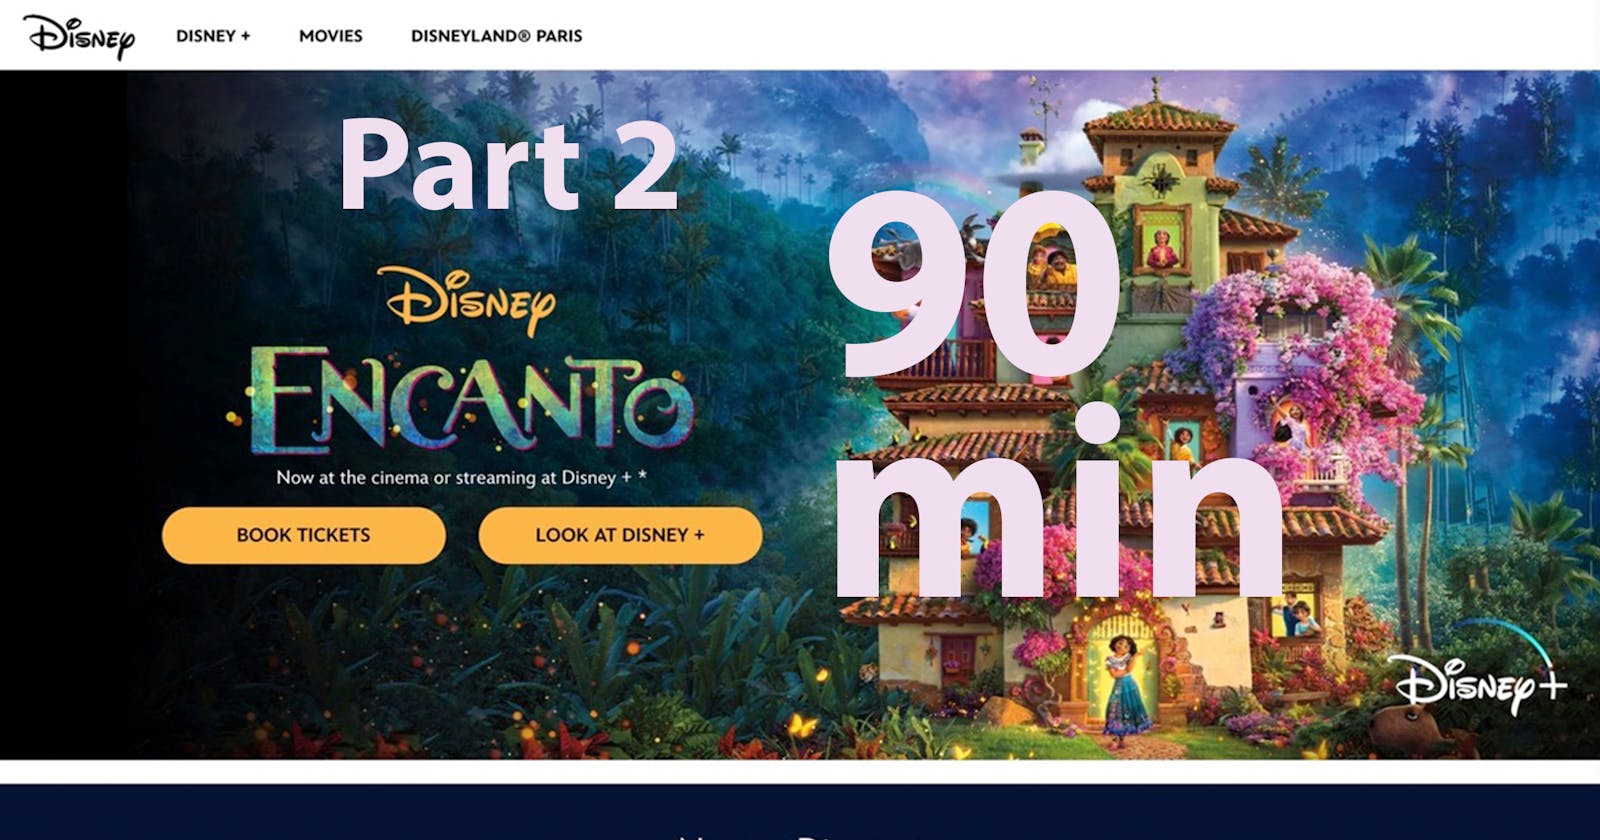 (PART 2) Make the Disney.com Landing Page in 90 minutes - YouTube Tutorial